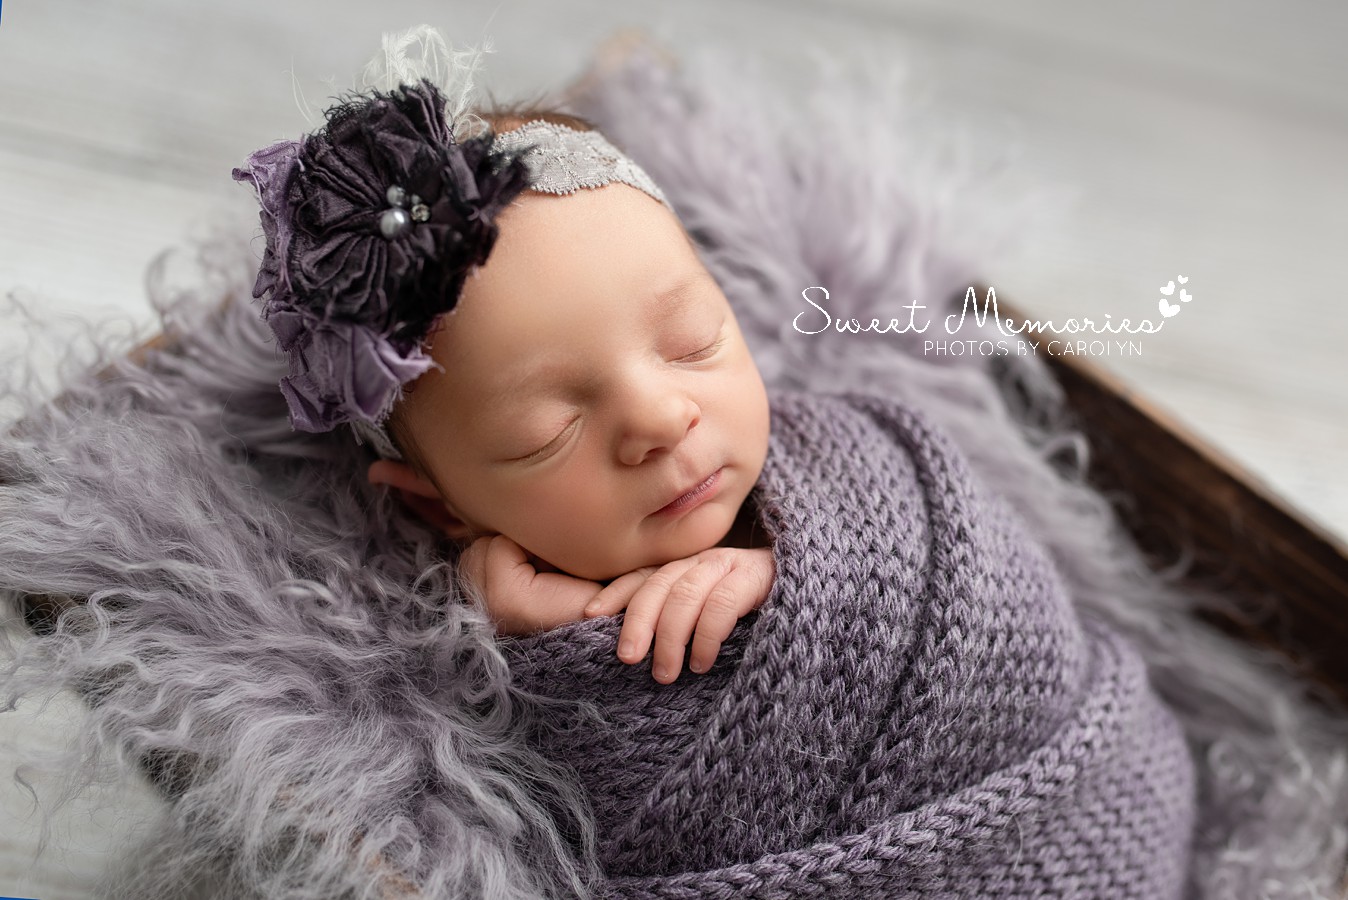 Newborn girl purple butterfly floral theme session | Austin newborn with family photography | Sweet Memories Photos by Carolyn